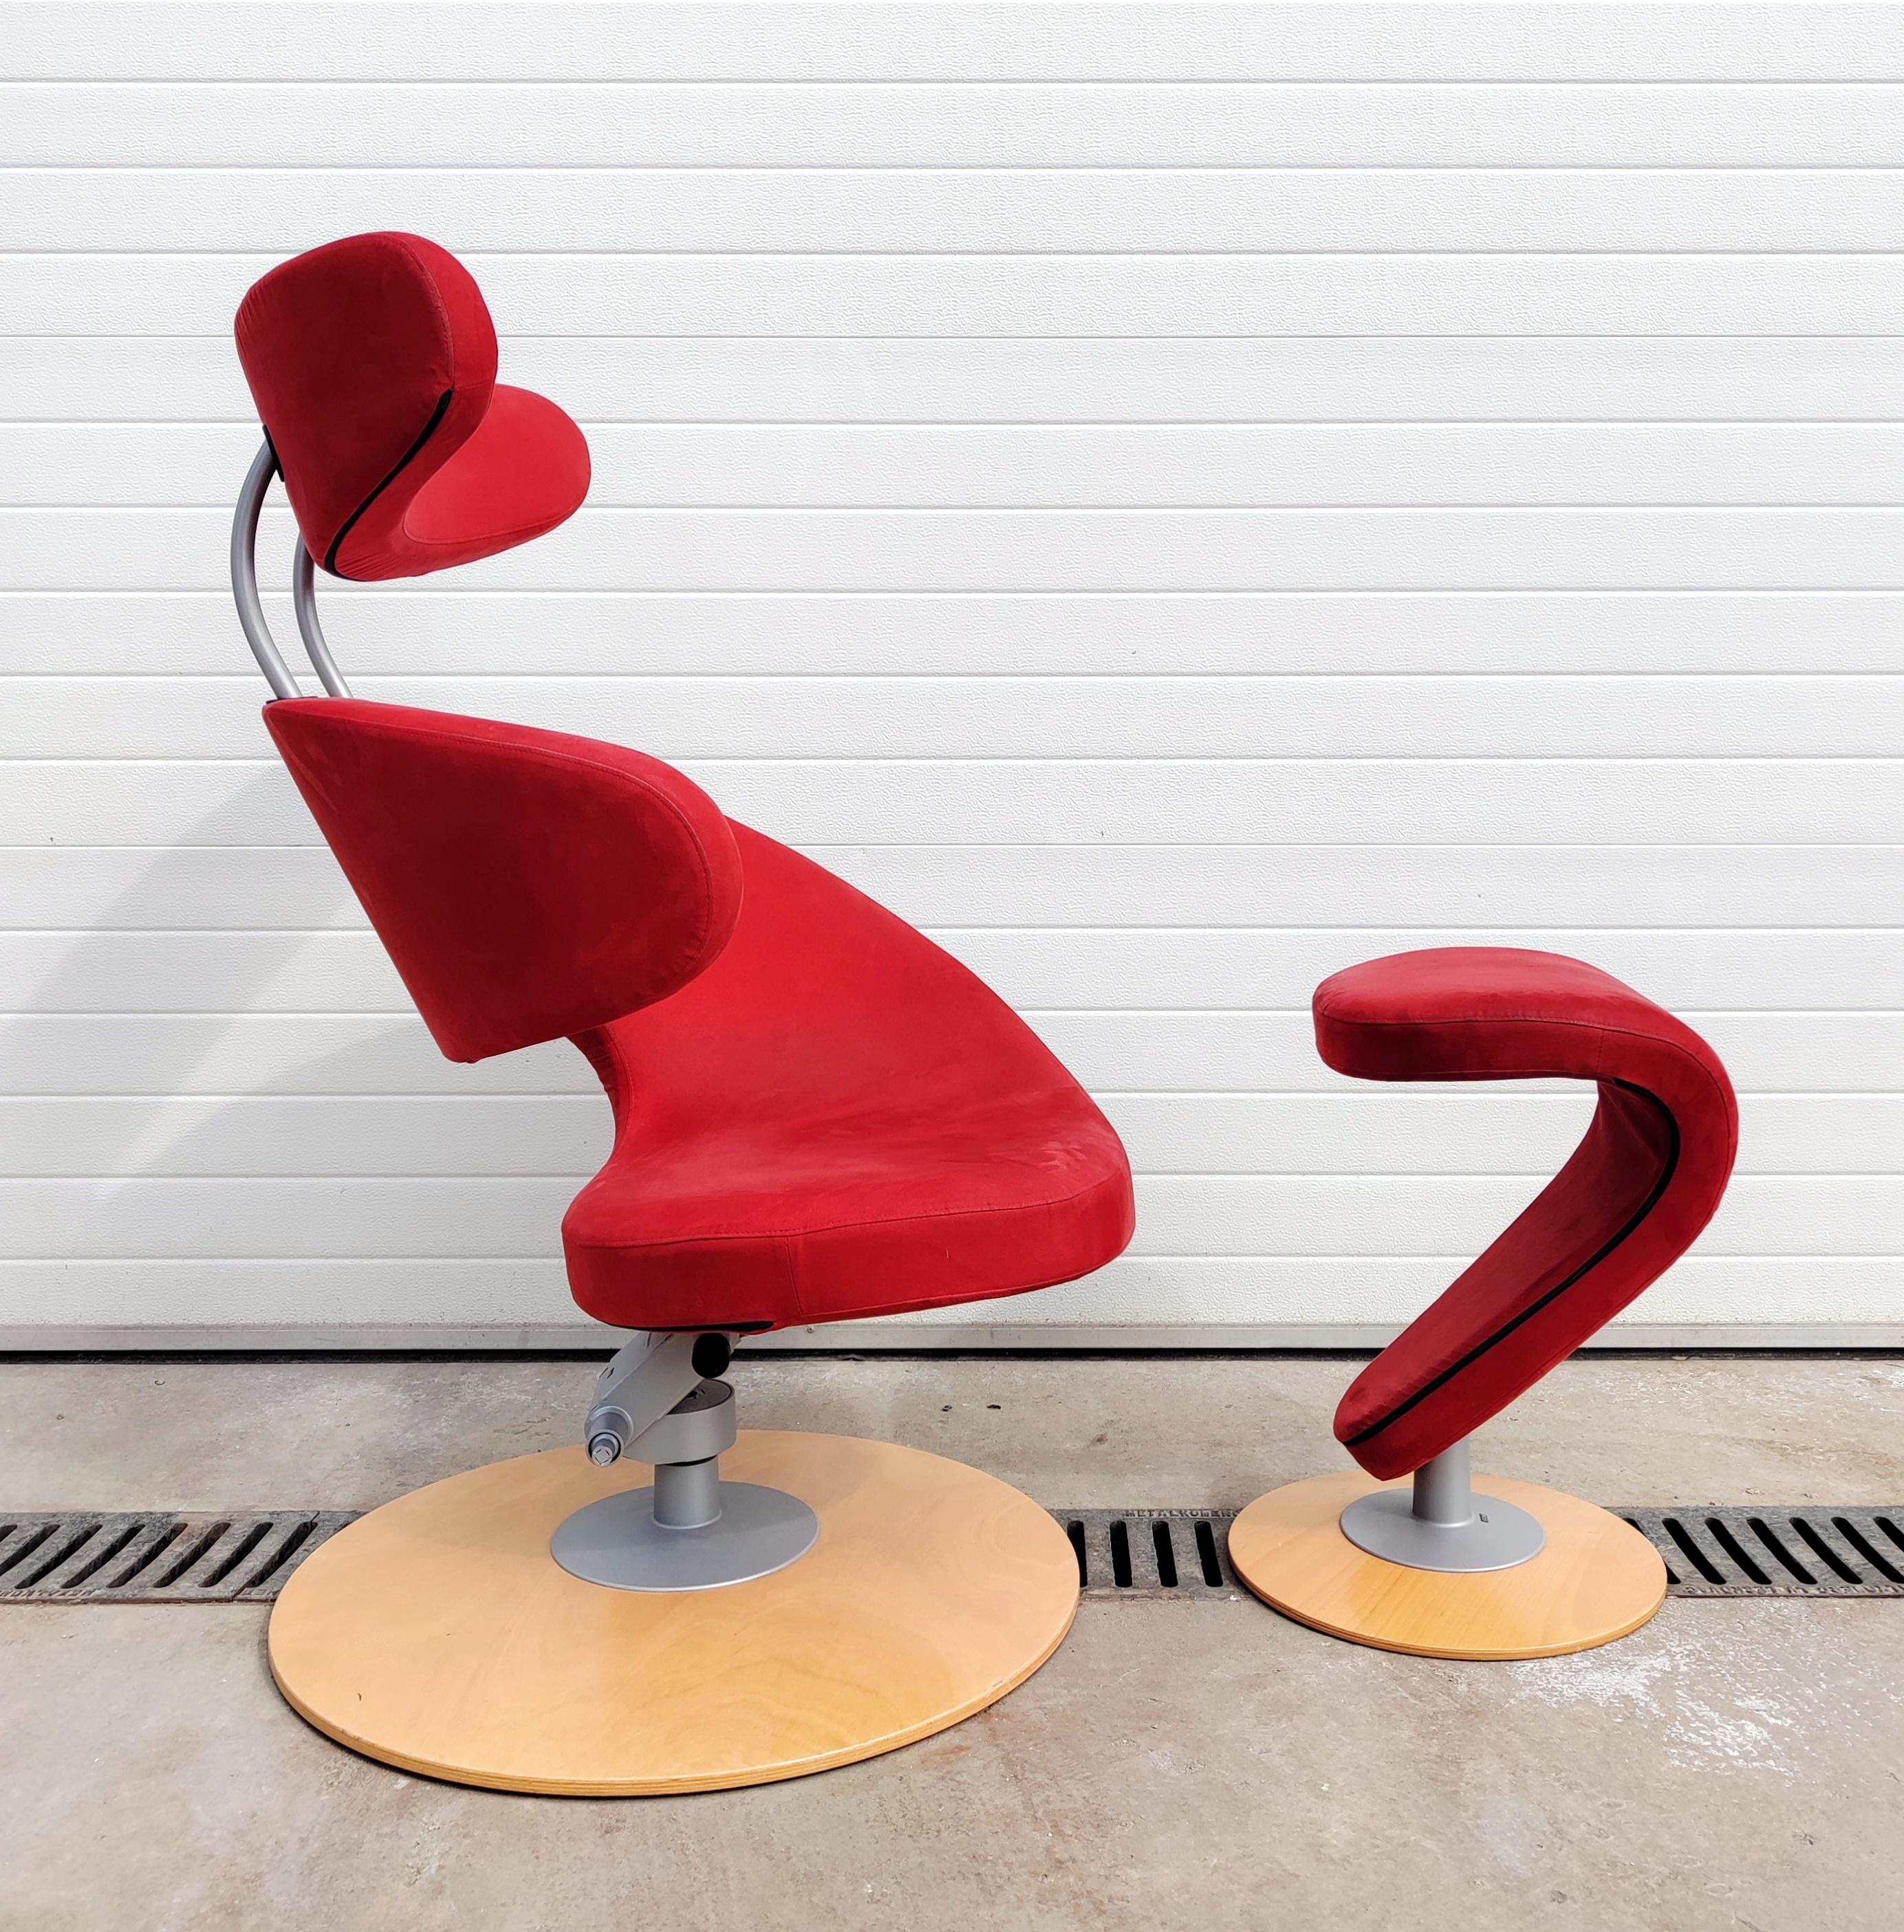 In this listing you will find a postmodernist armchair calledPeel Armchair with foot rest in red fabric. It was designed by Olav Eldoy and made in Norway in 2002. It features round wooden base and aluminum construction and comes together with a foot